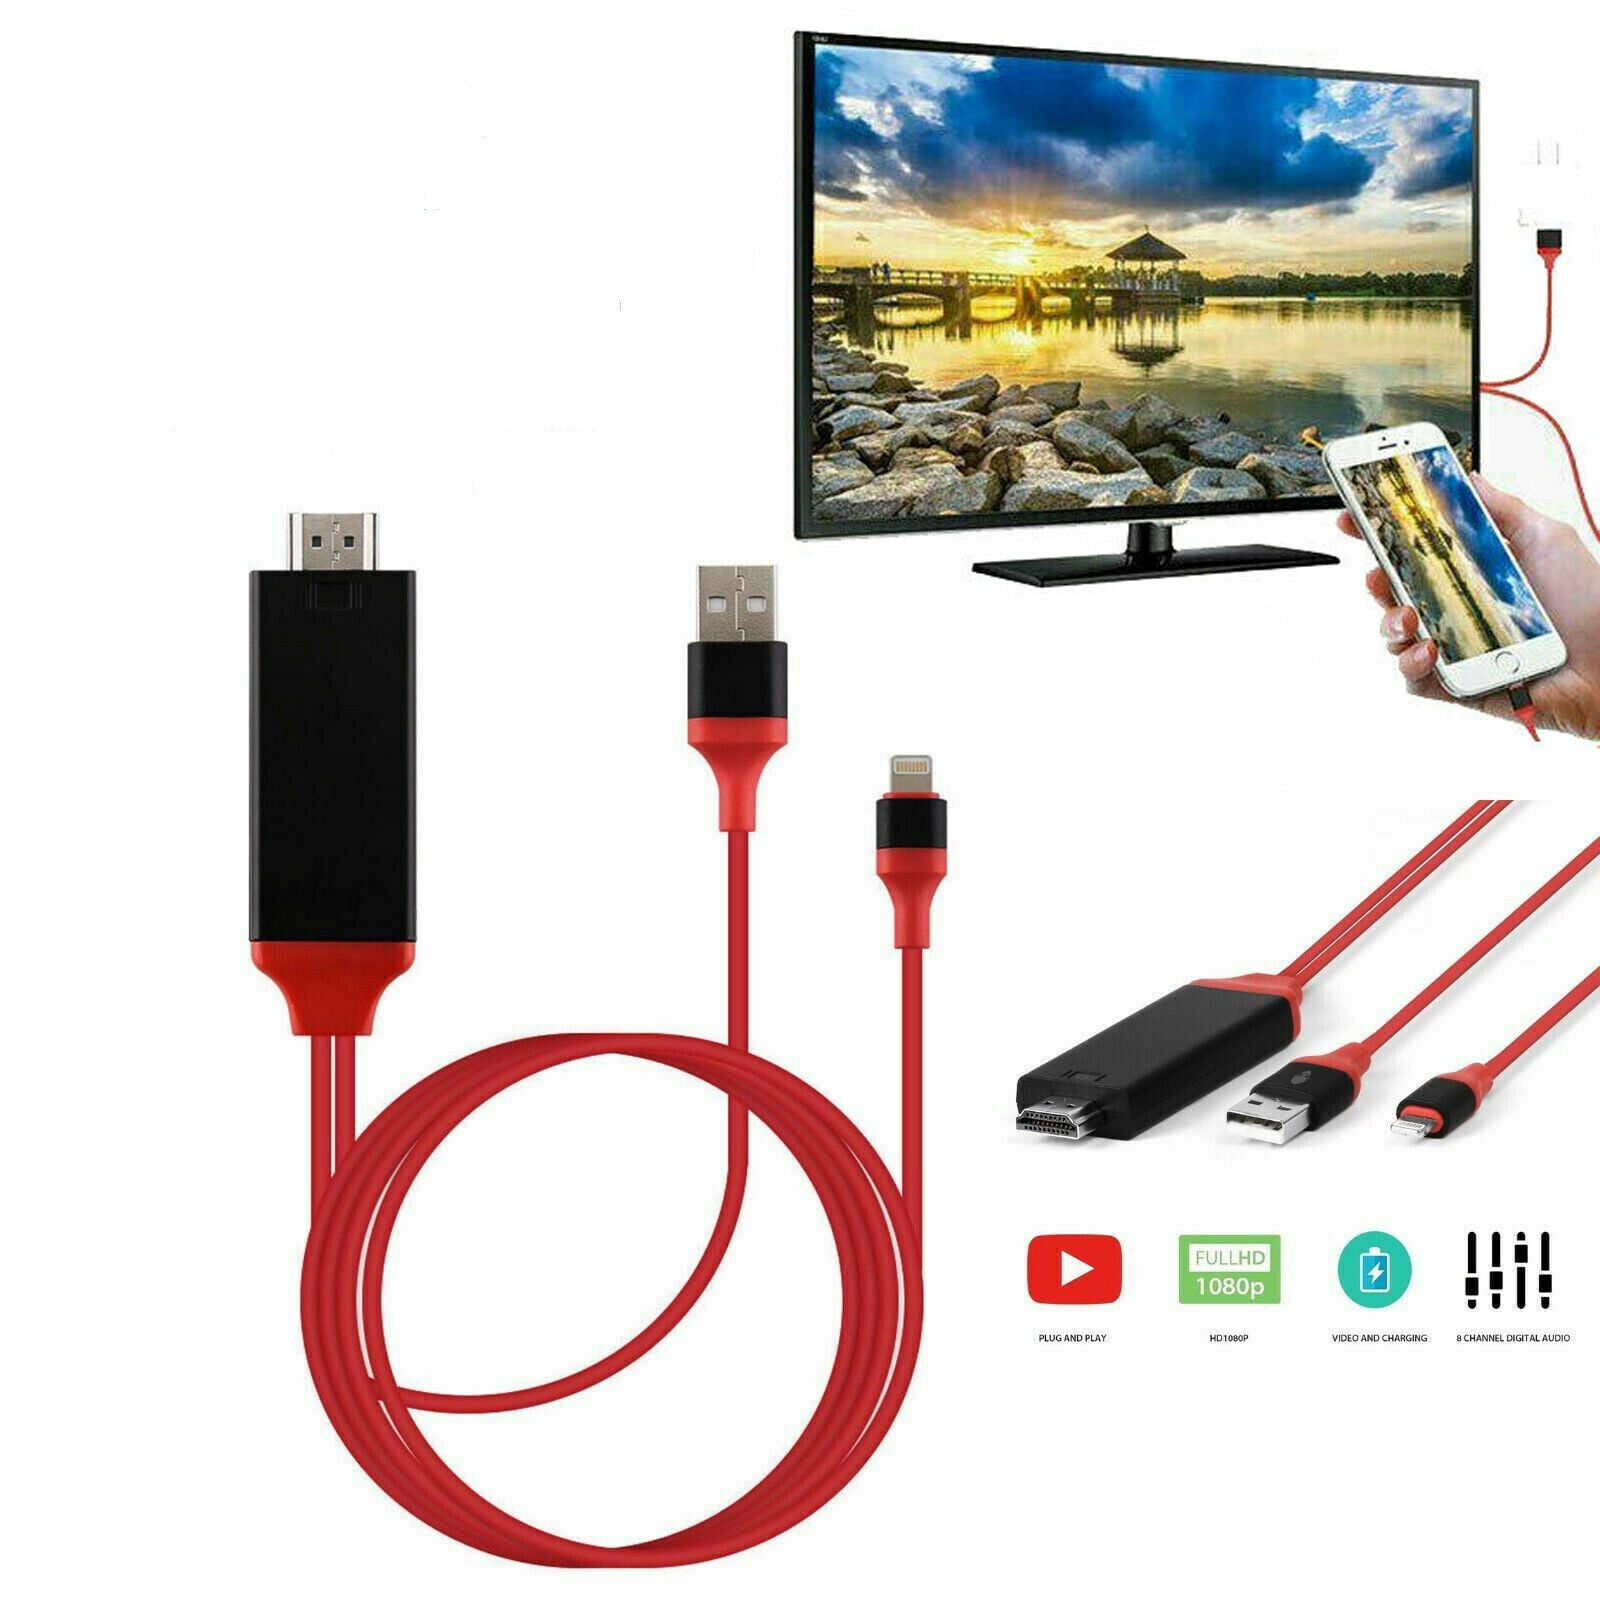 Lightning to HDMI Digital AV TV Cable,Compatible with iPad iPhone to - Ver Ipad En Tv Con Cable Hdmi